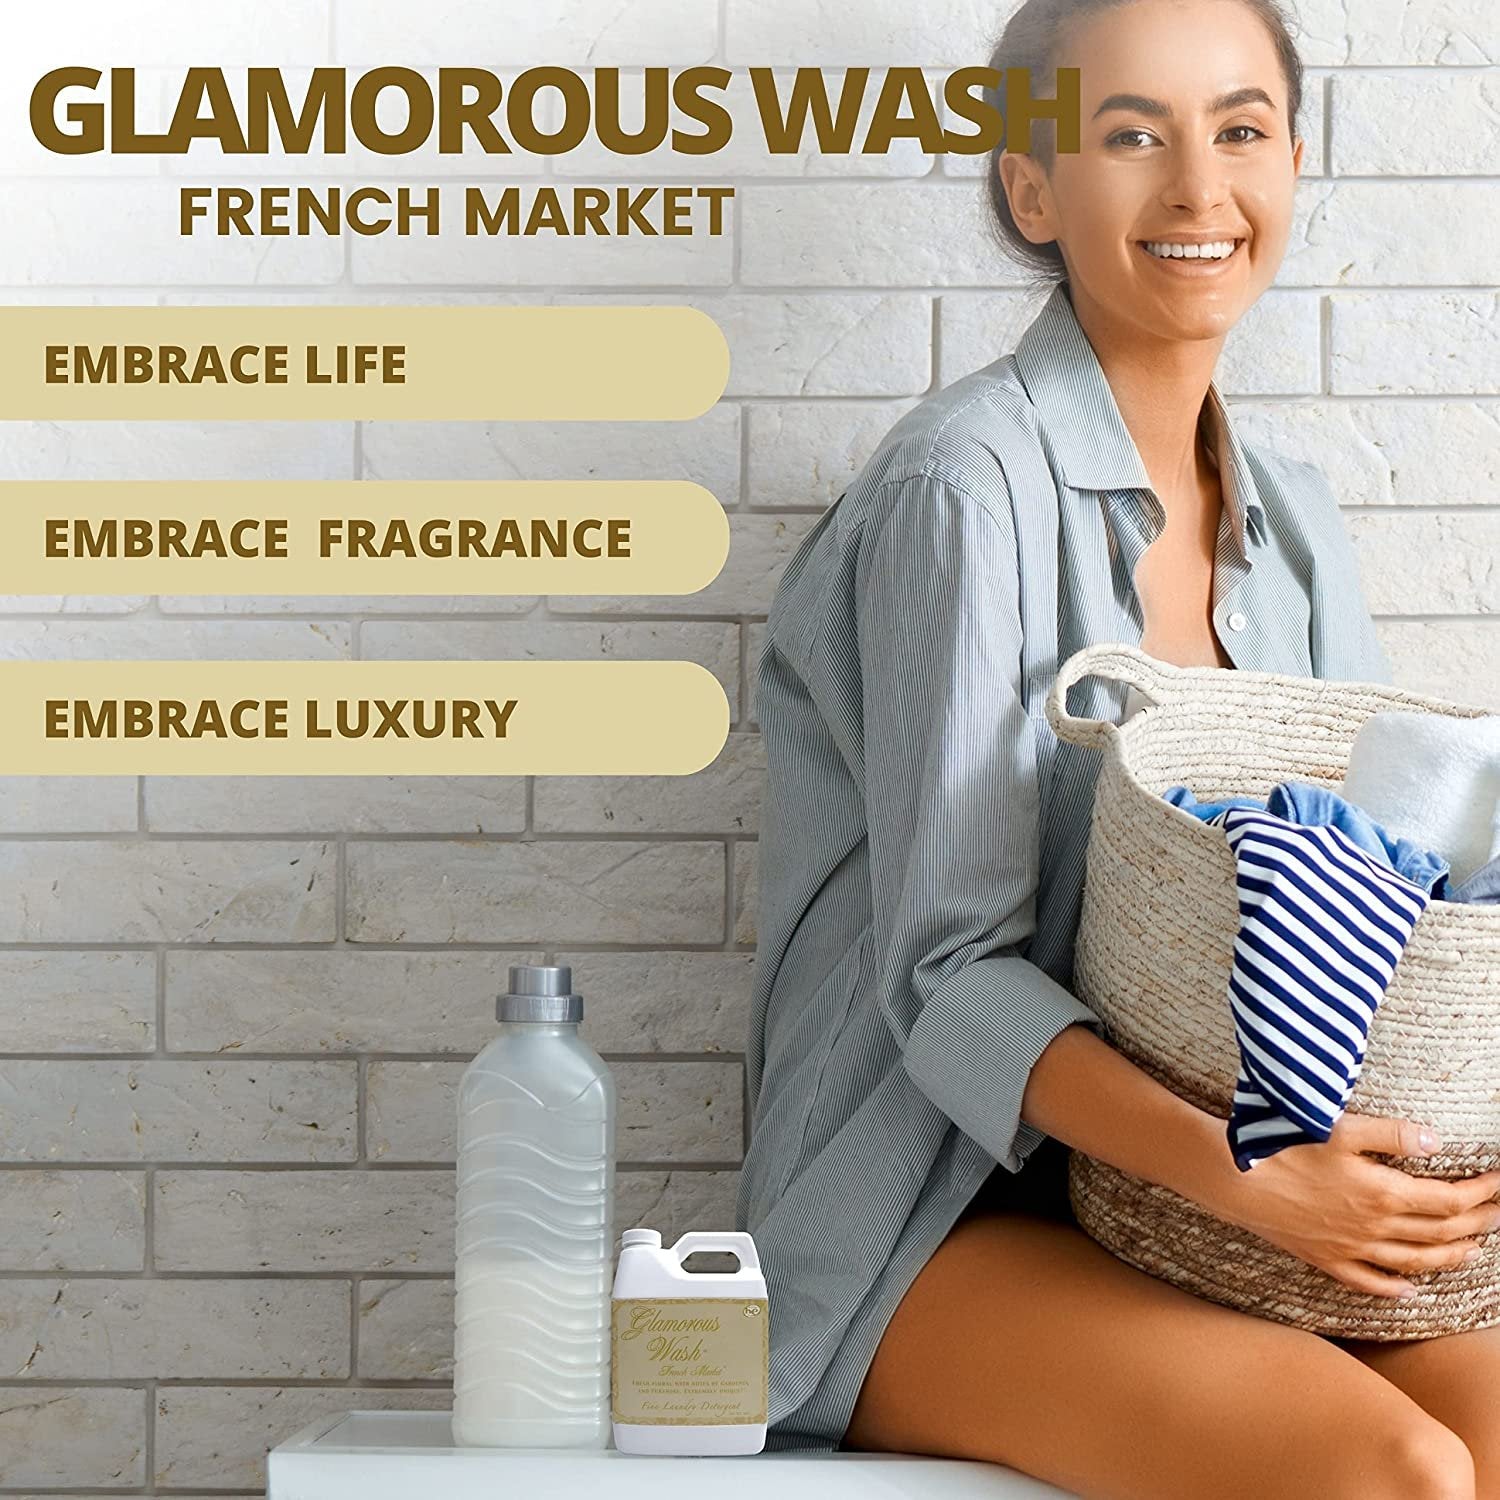 Tyler Candle Company Glamorous Wash French Market Scent Fine Laundry Liquid Detergent - Liquid Laundry Detergent for Clothing - Hand and Machine Washable - 32 oz, 907-grams Container w Bonus Key Chain